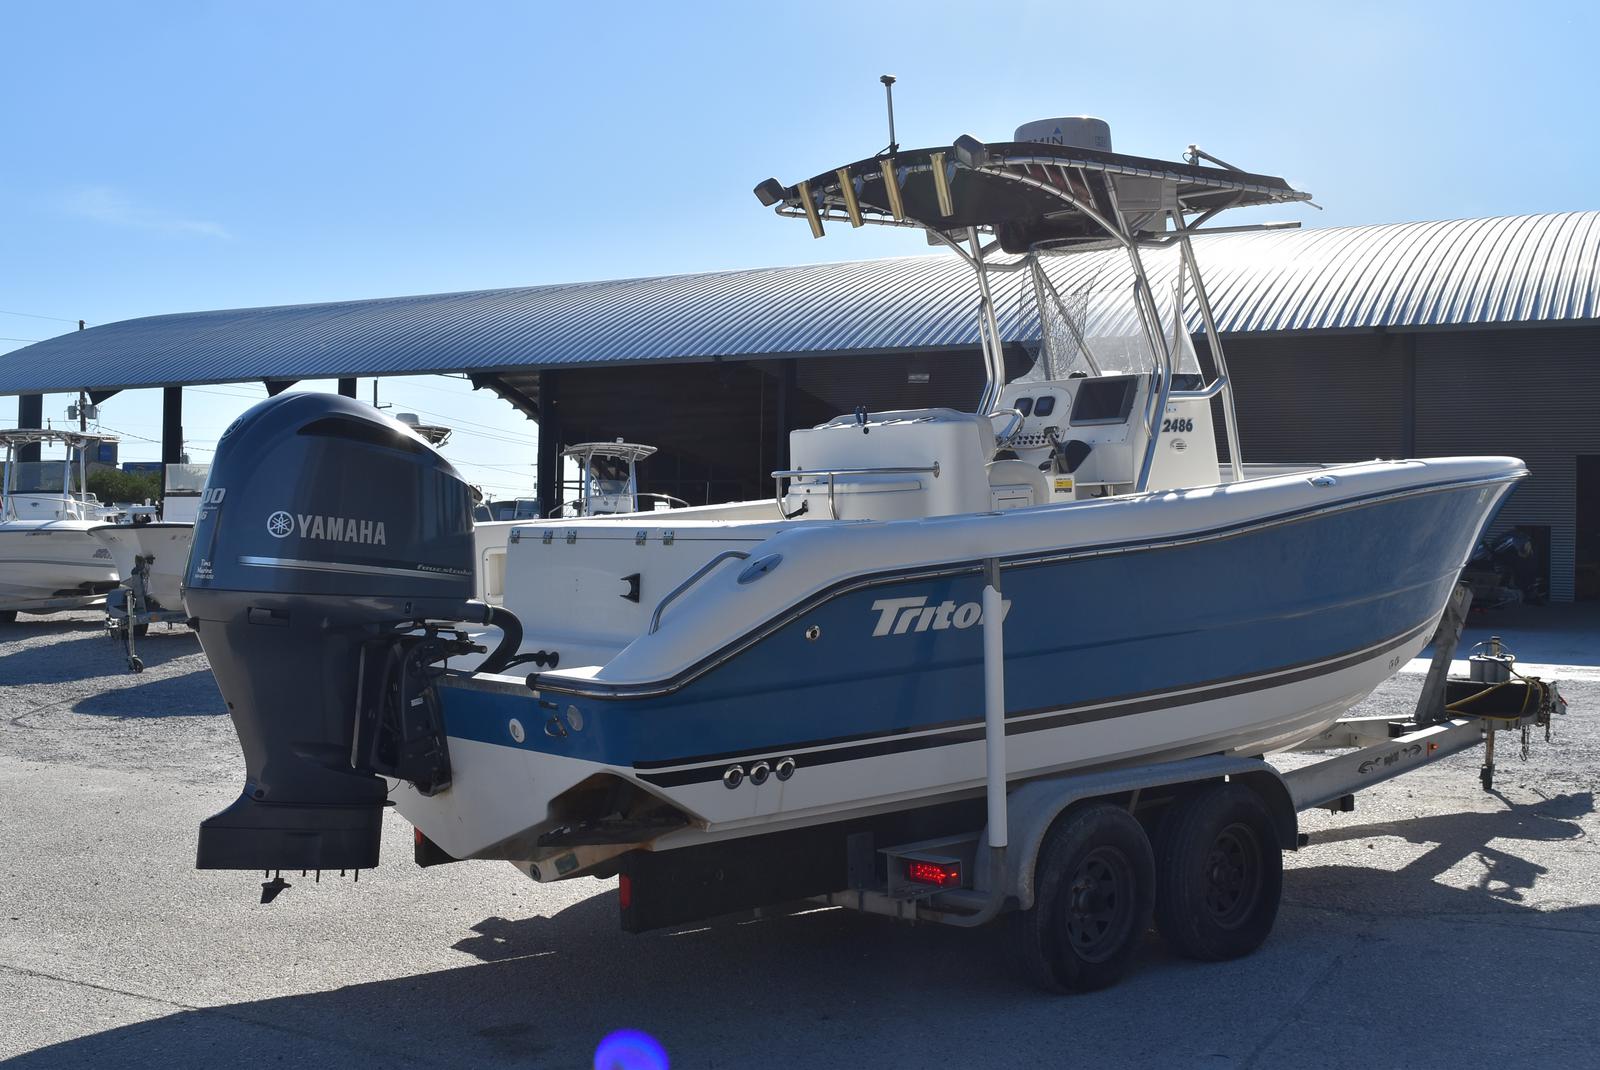 2006 Triton boat for sale, model of the boat is 2486 & Image # 3 of 24